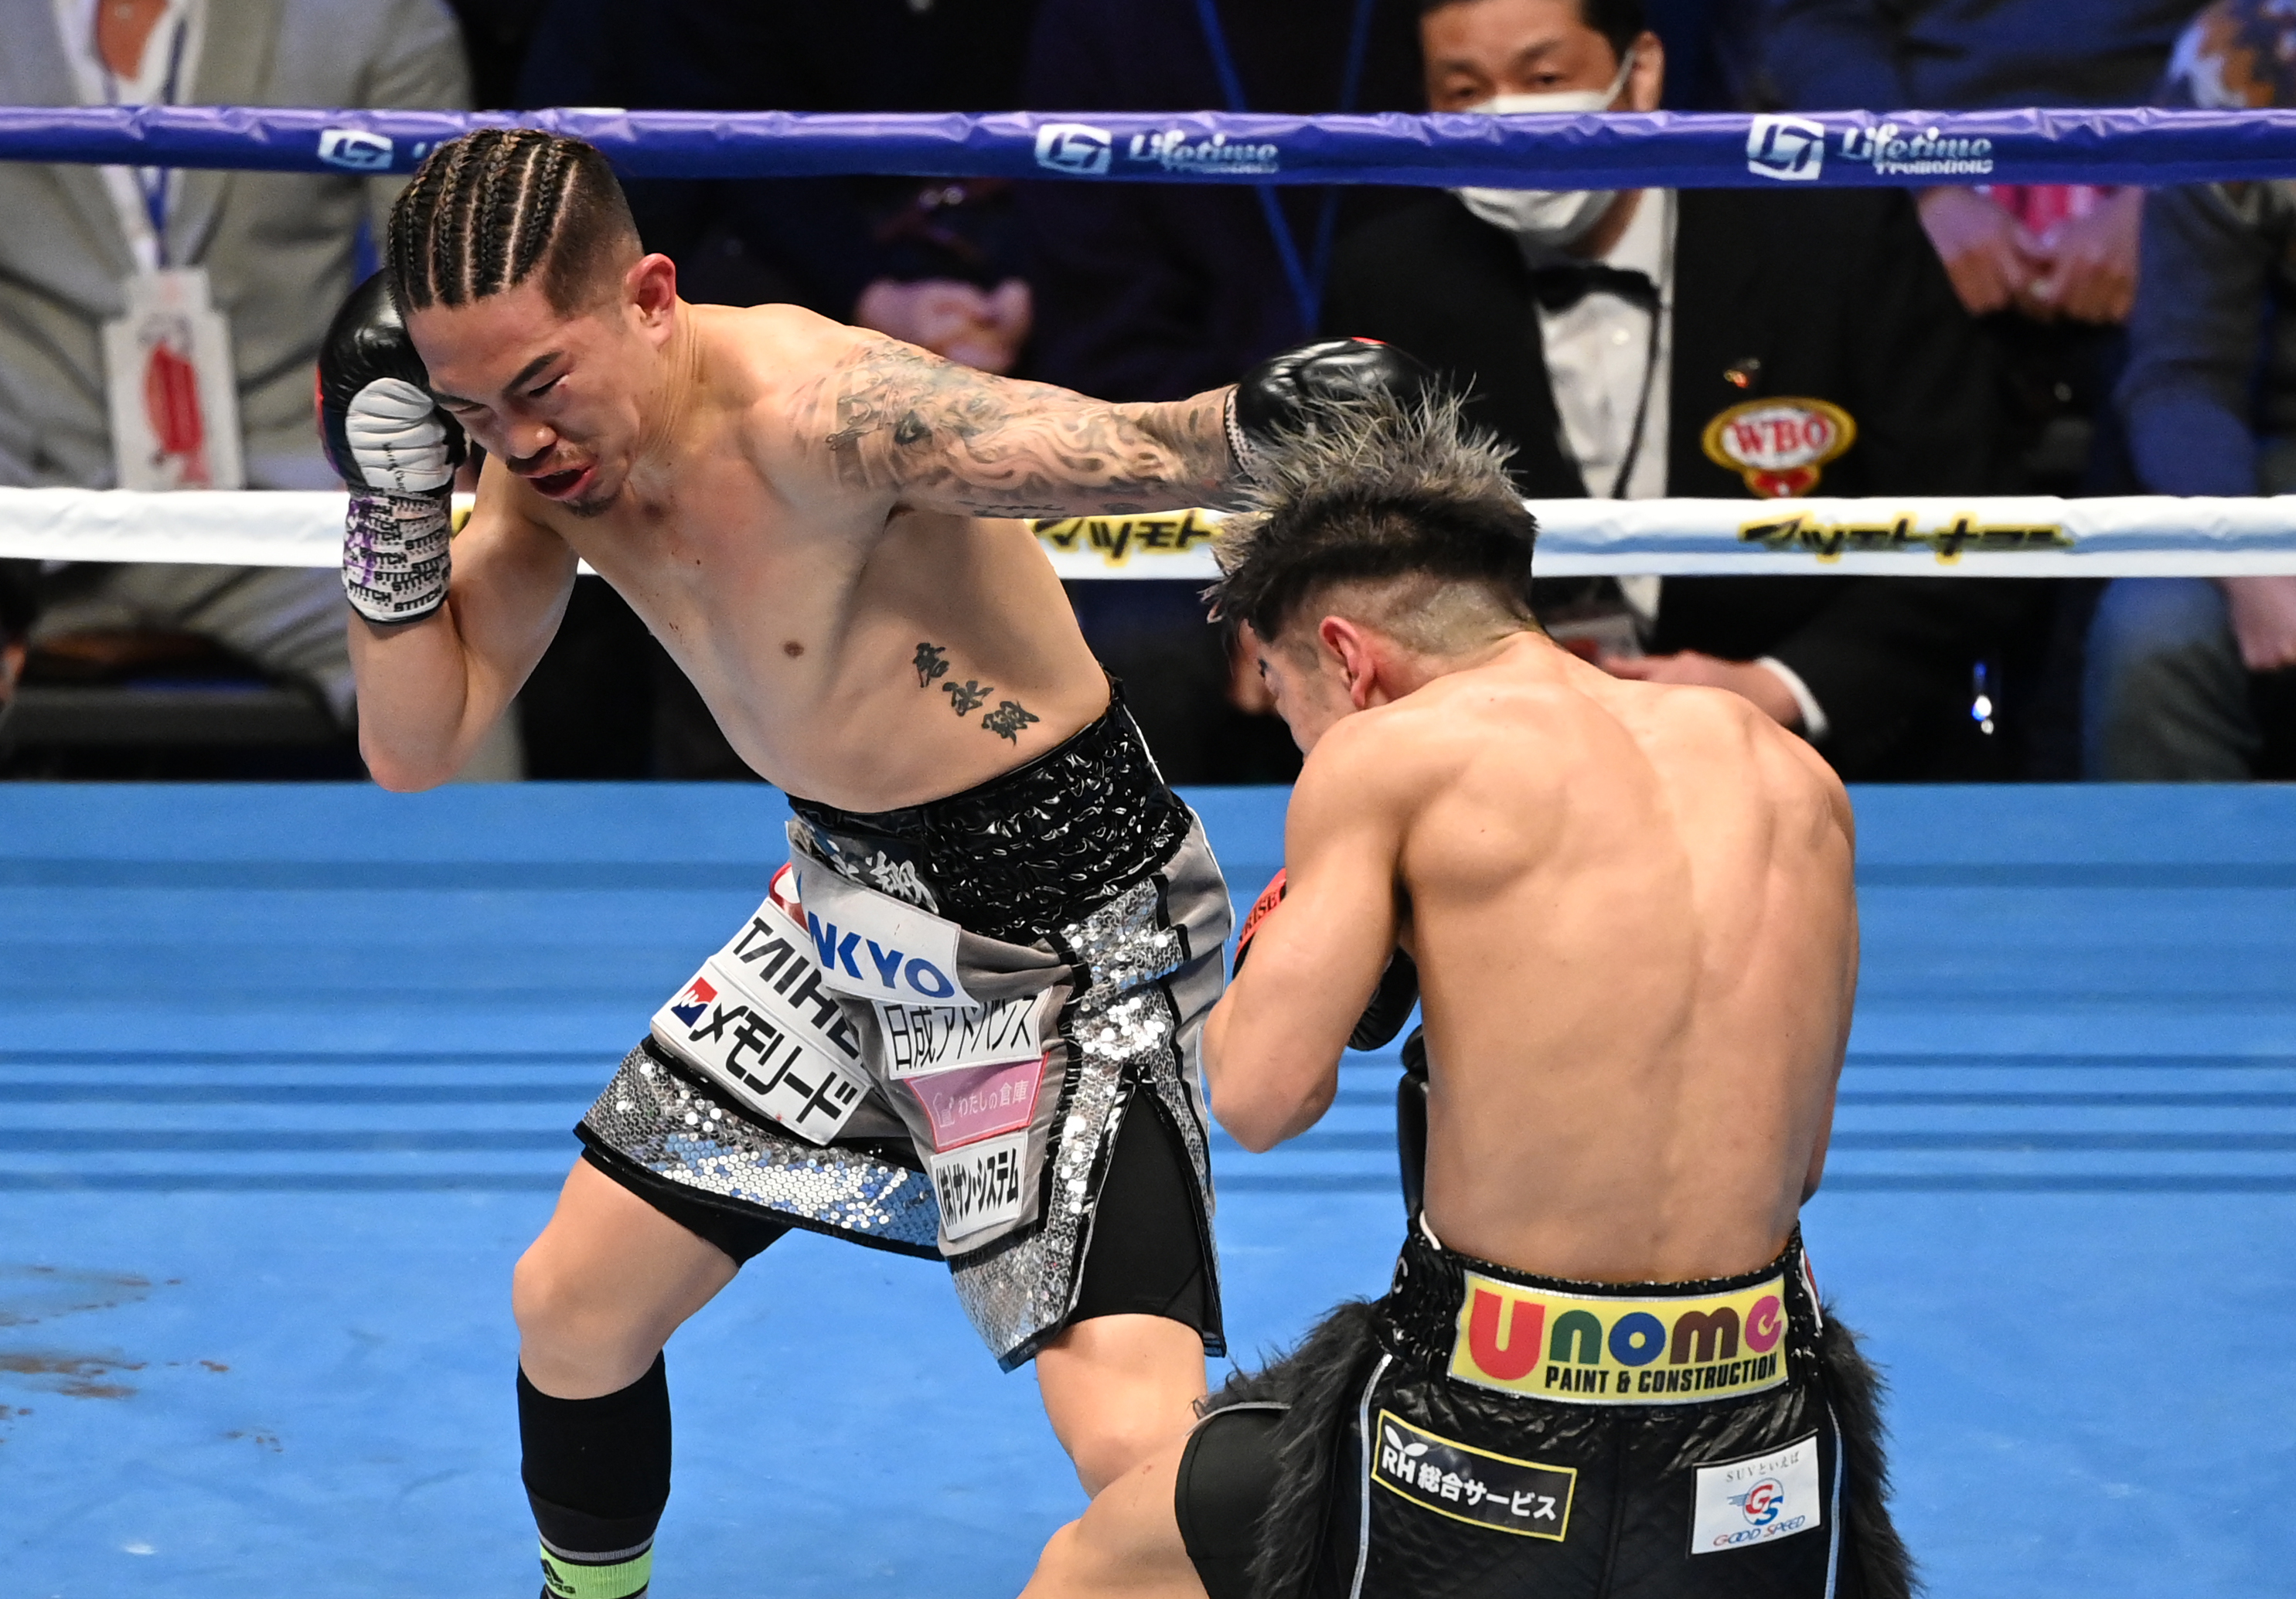 Row erupts in Italy over boxer with neoNazi tattoos  Italy  The Guardian